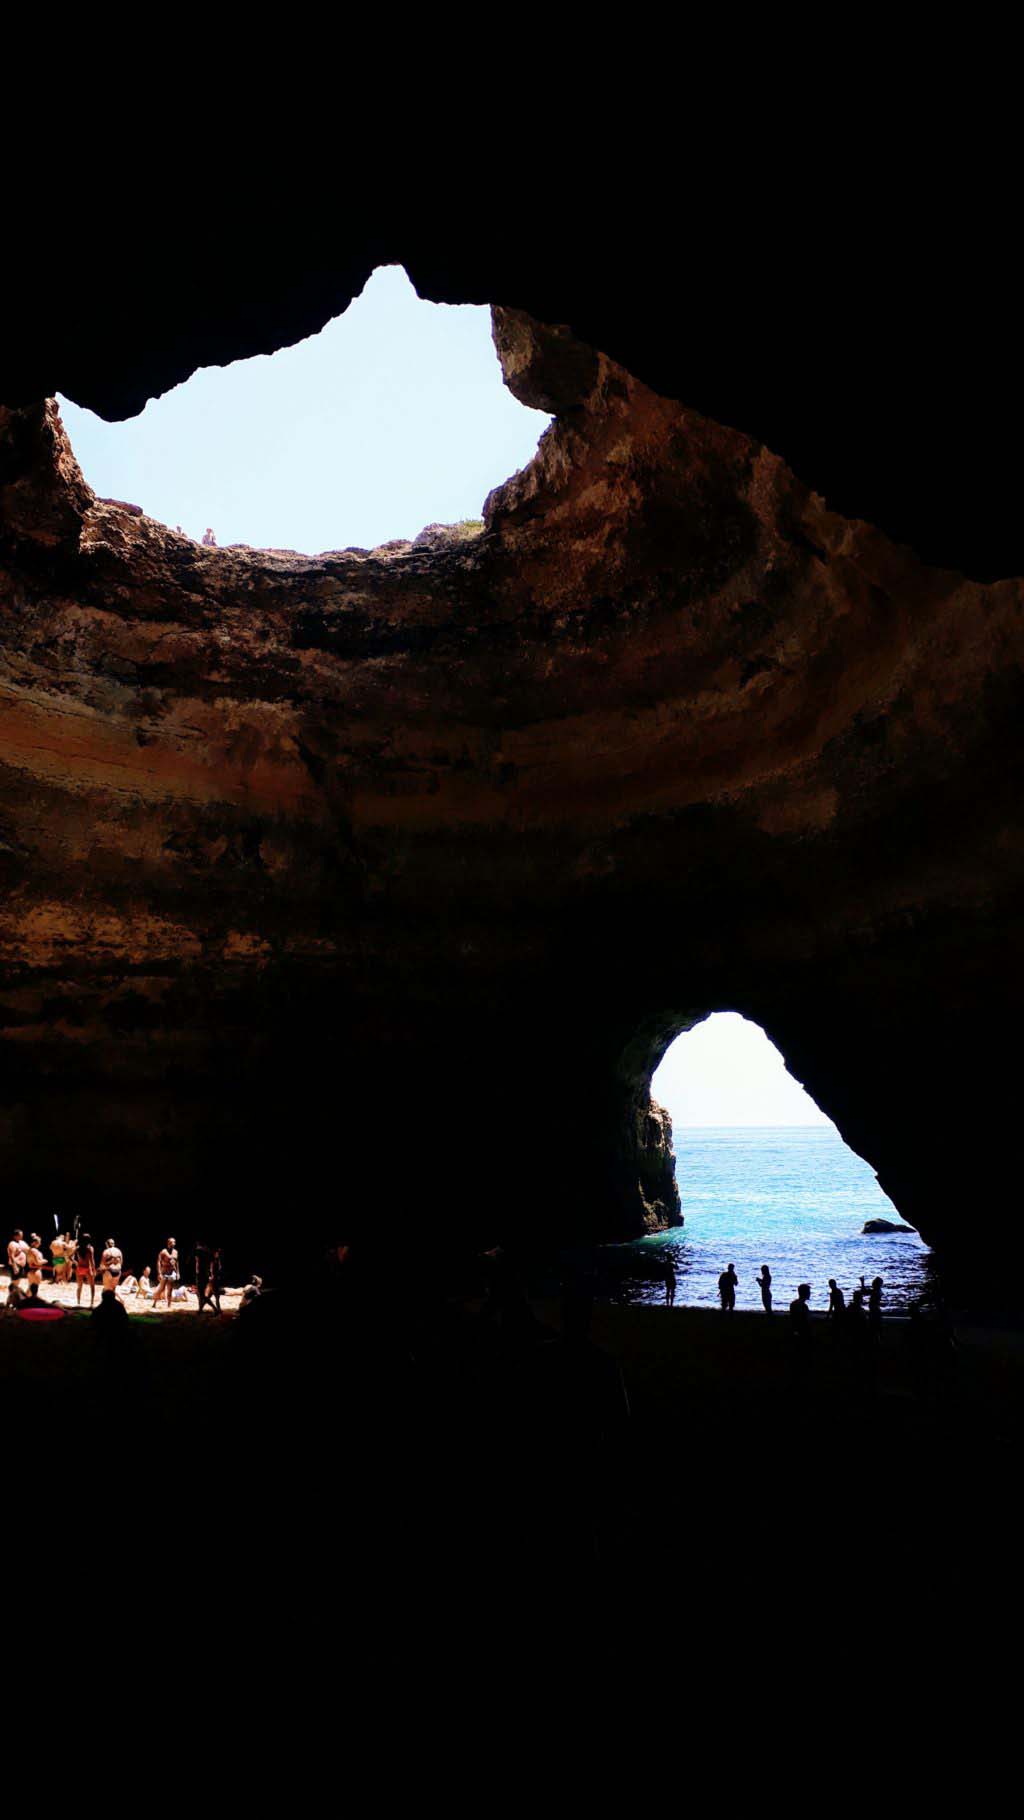 The highlight of the Algarve: the Benagil Cave